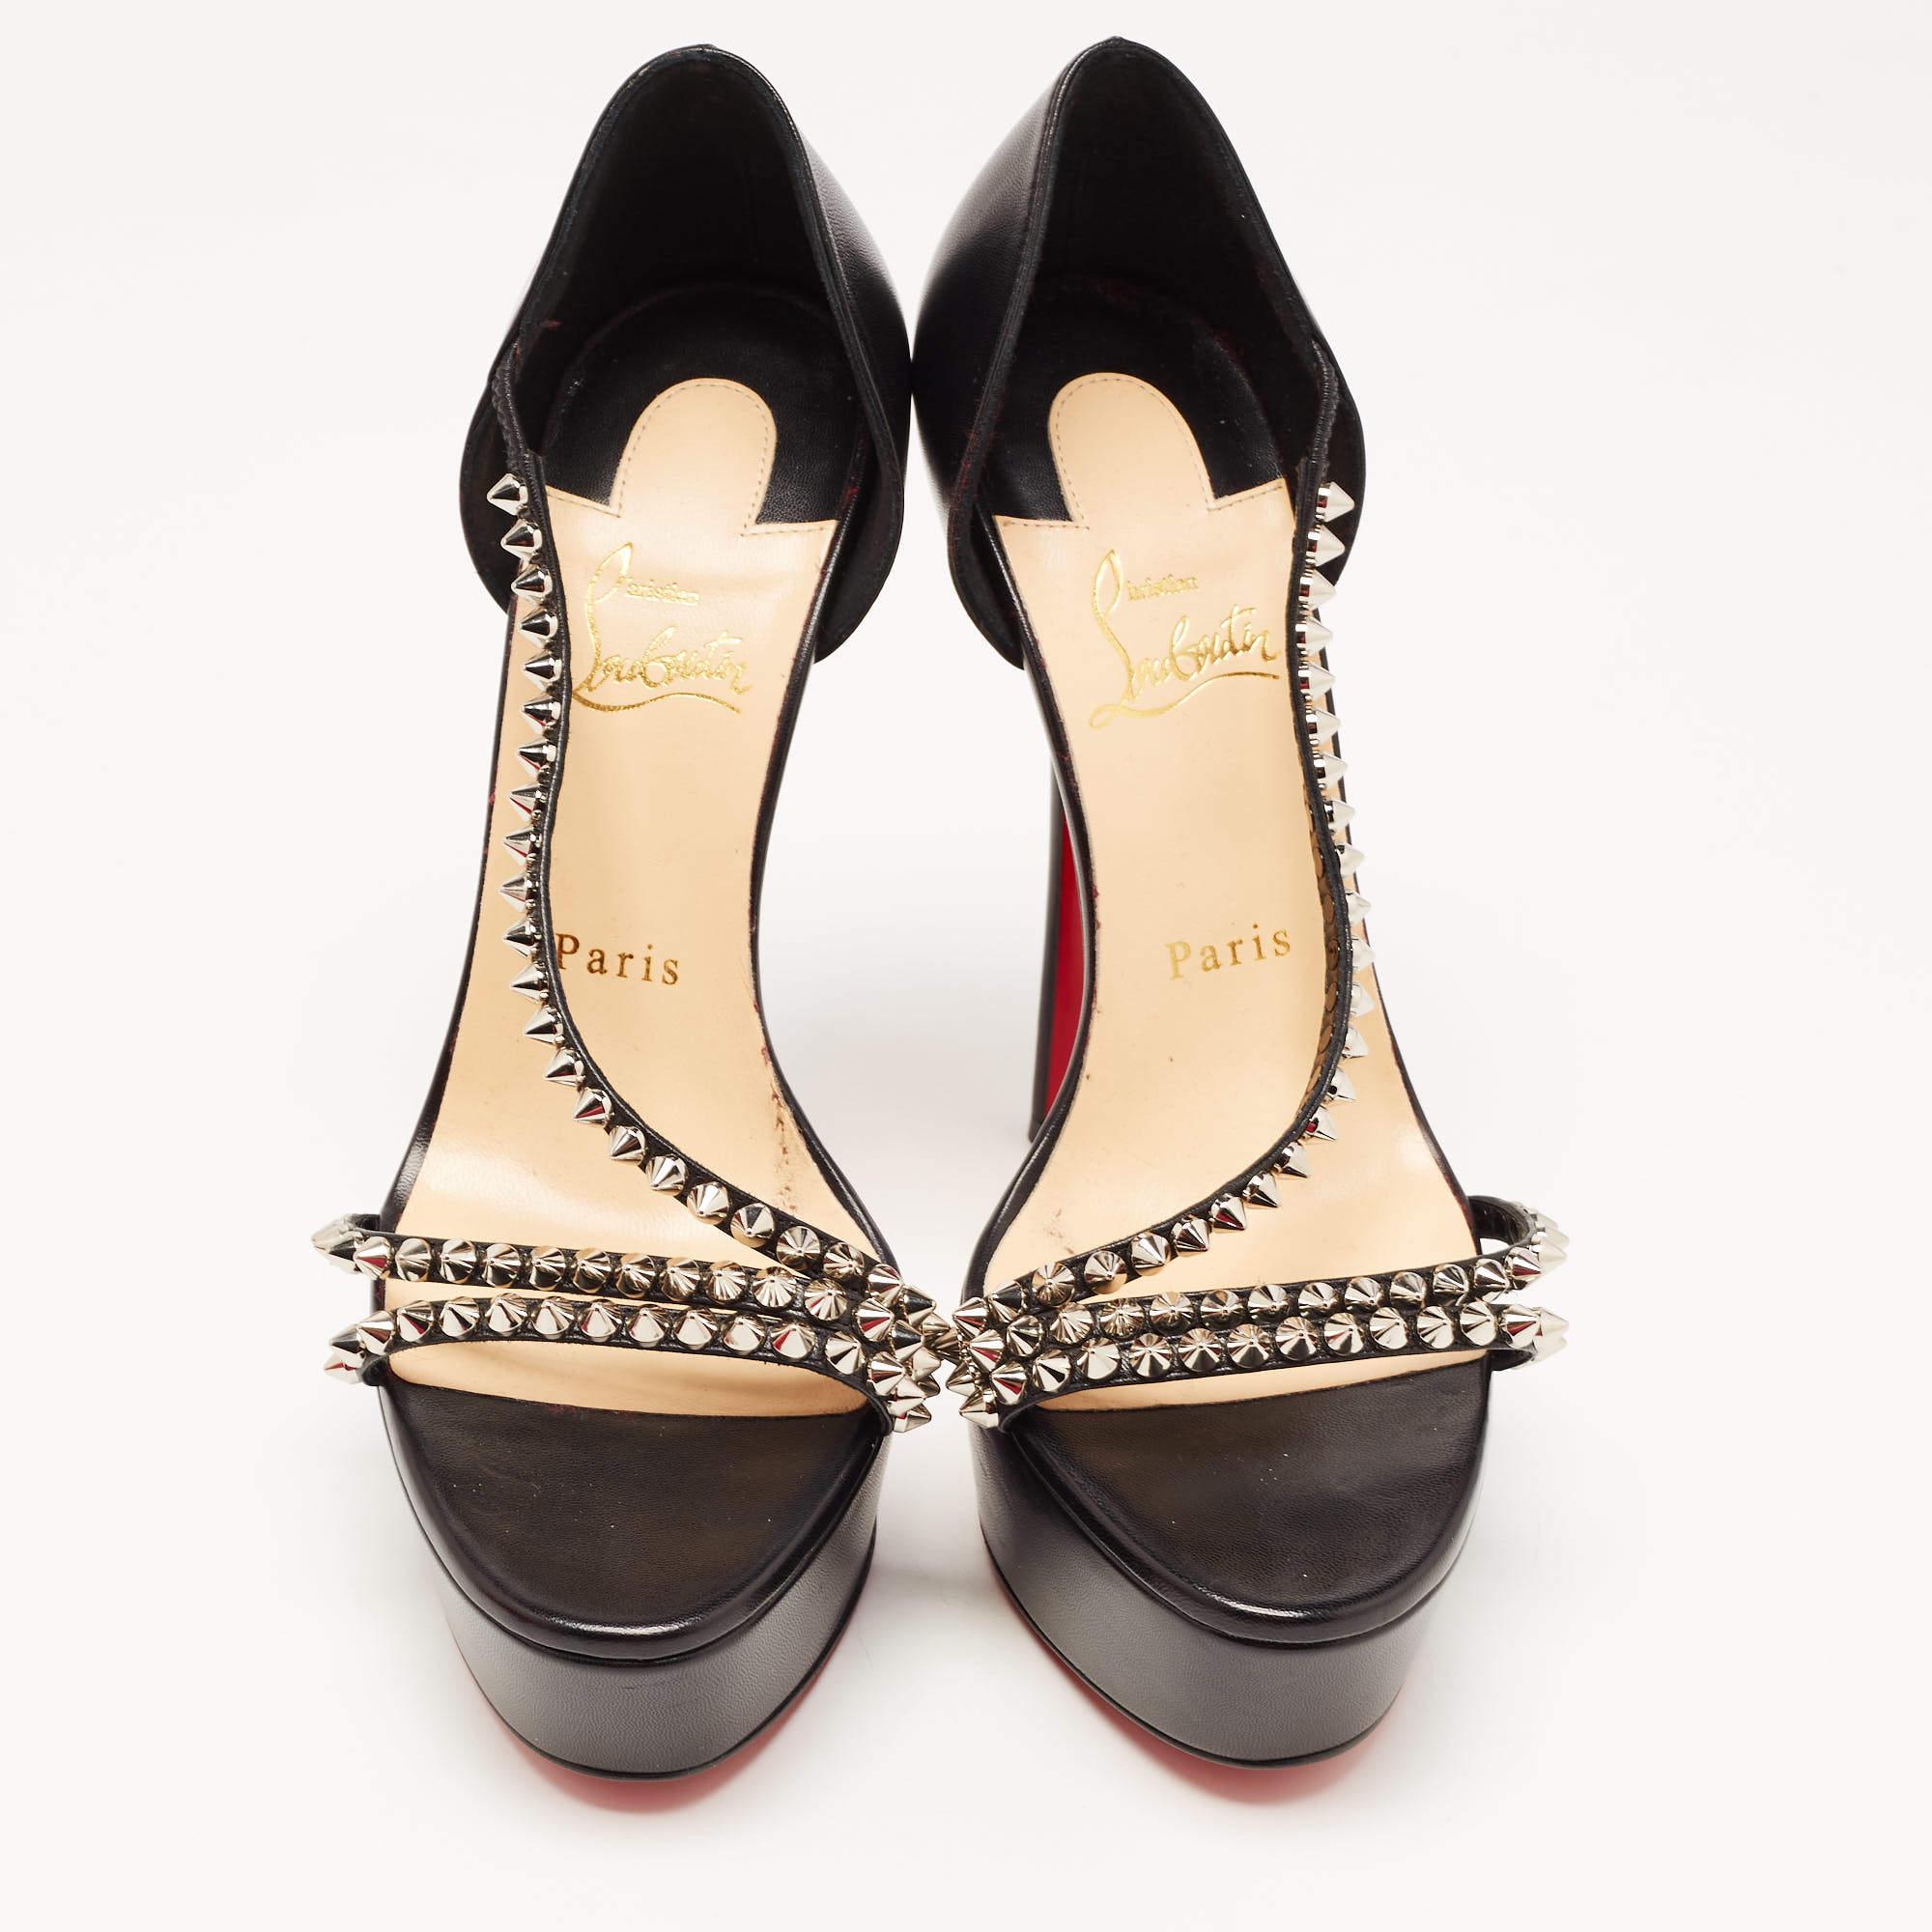 Christian Louboutin Black Leather So Spike Alta Sandals Size 38 3